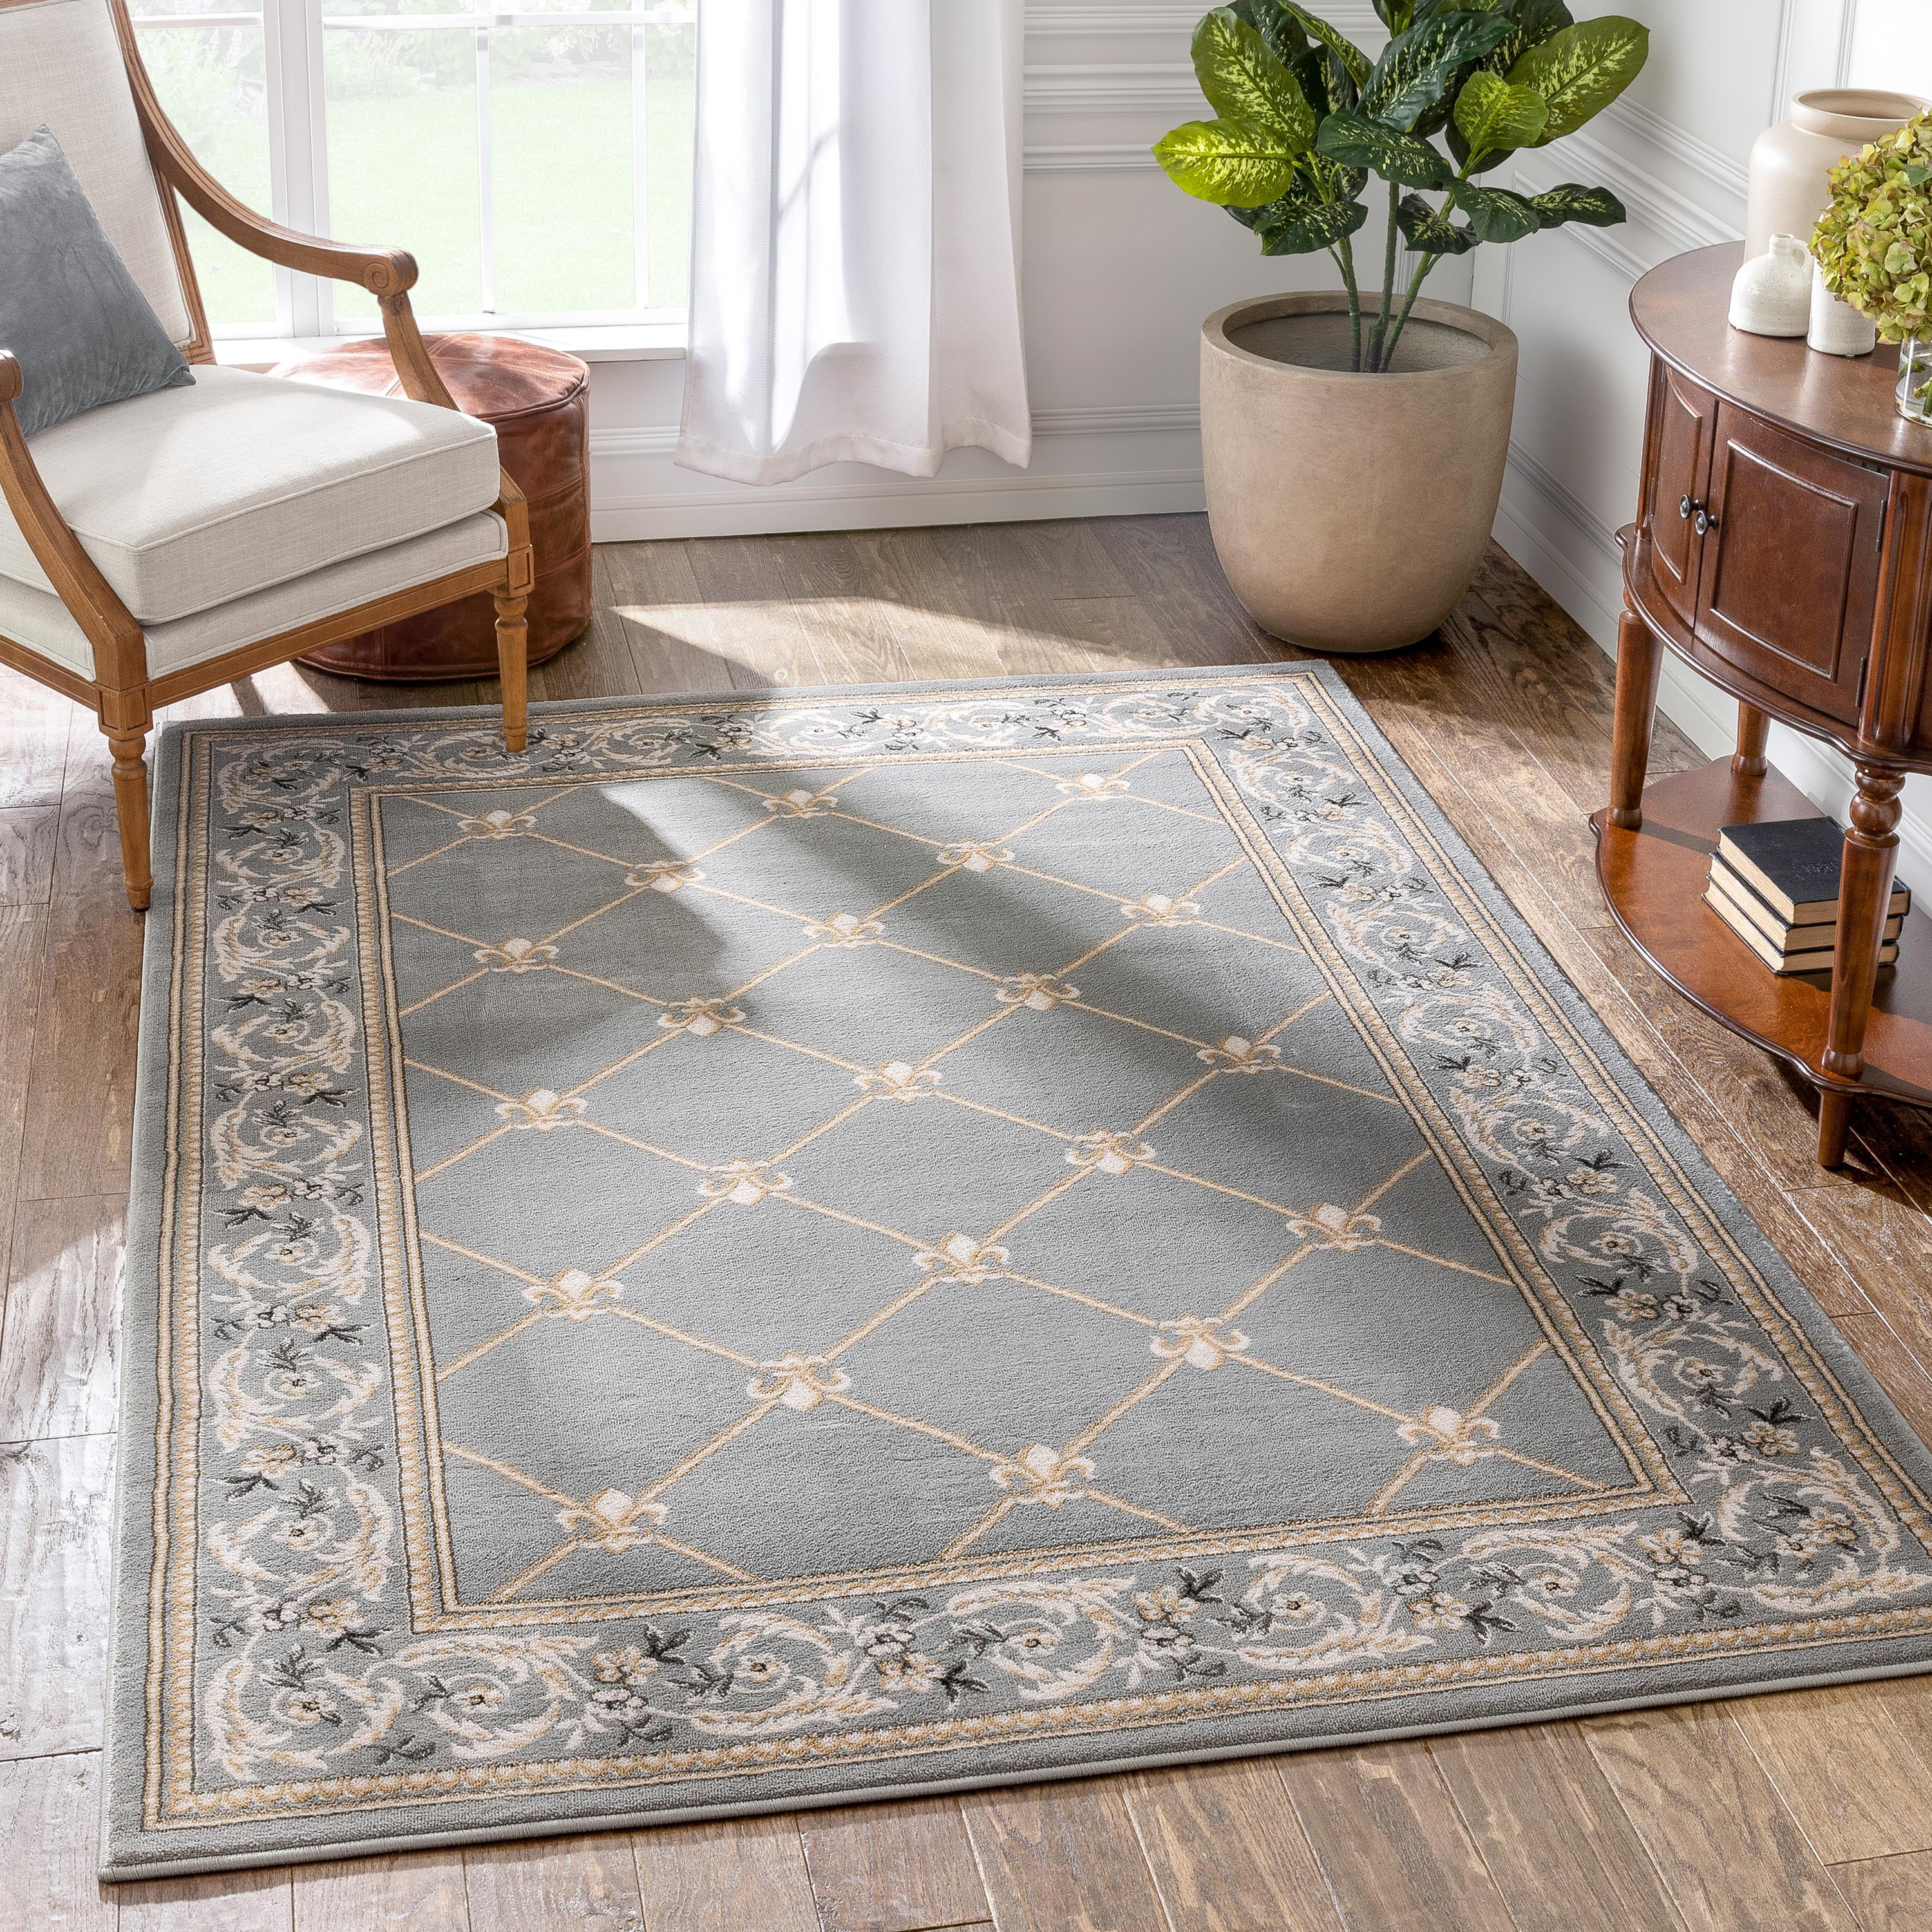 Patrician Trellis Grey Lattice Area Rug, Which Rug Is Easy To Clean